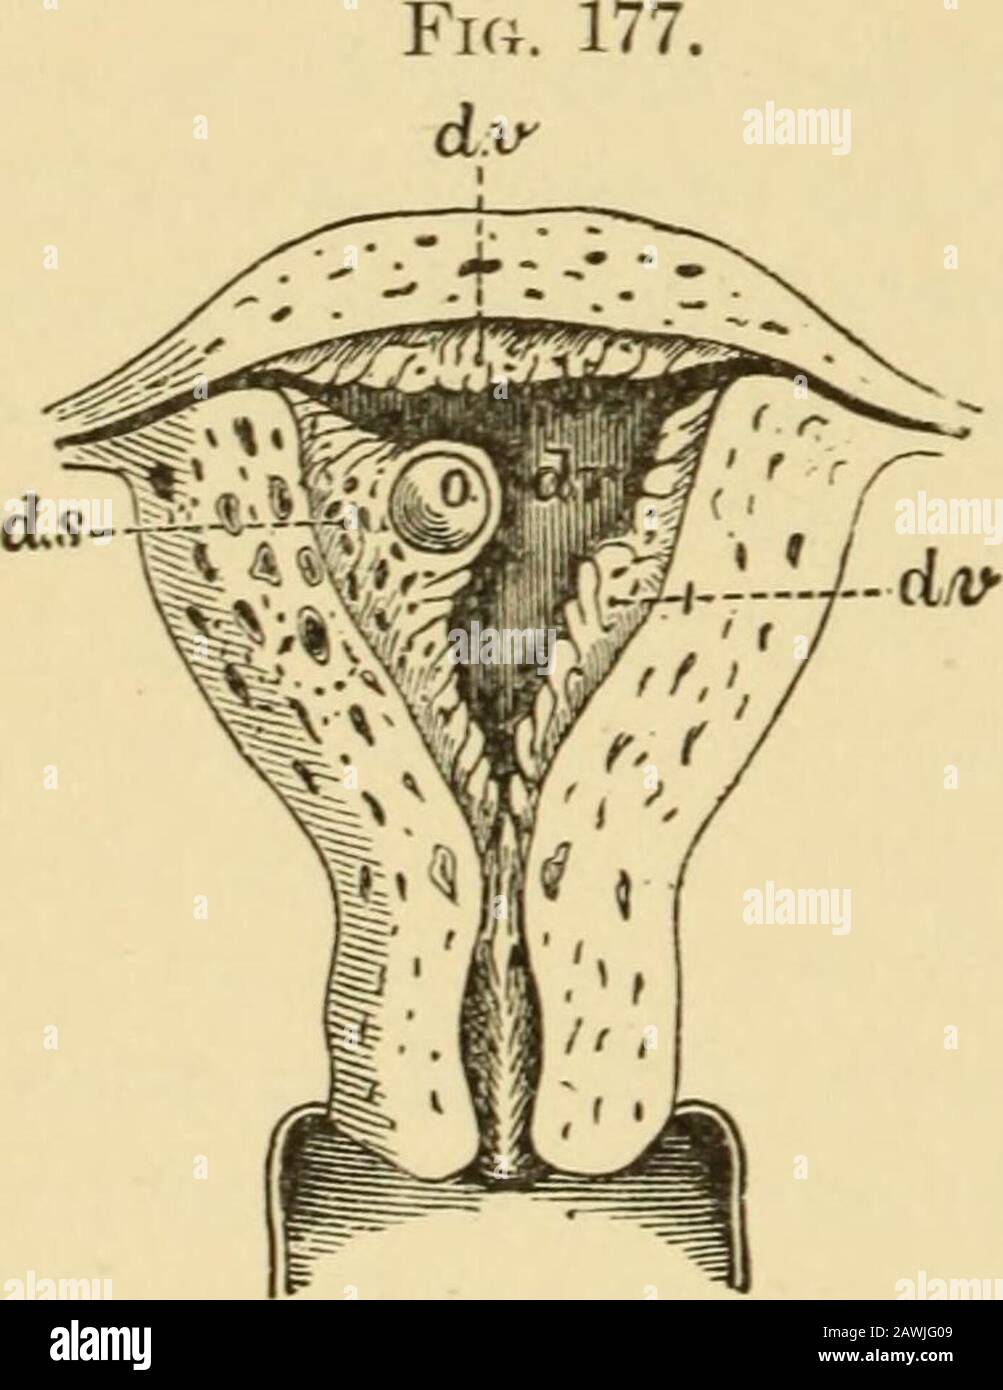 A system of obstetrics . iedlander, Kundrat,Leopold, Engelmann, and others have enabled us to follow the changesthat occur in the uterine mucous membrane from the entrance of theimpregnated ovule into the uterine cavity until the foetus, with itsenveloping membranes, is expelled at term. By the time the fertil-ized ovum arrives within the uterine cavity the lining mucous mem-brane of the uterus has become very much thickened,2 owing to a greatincrease in the interglandular connective tissue, which consists of enor-mously enlarged young connective-tissue cells, either closely pressedtogether or Stock Photo